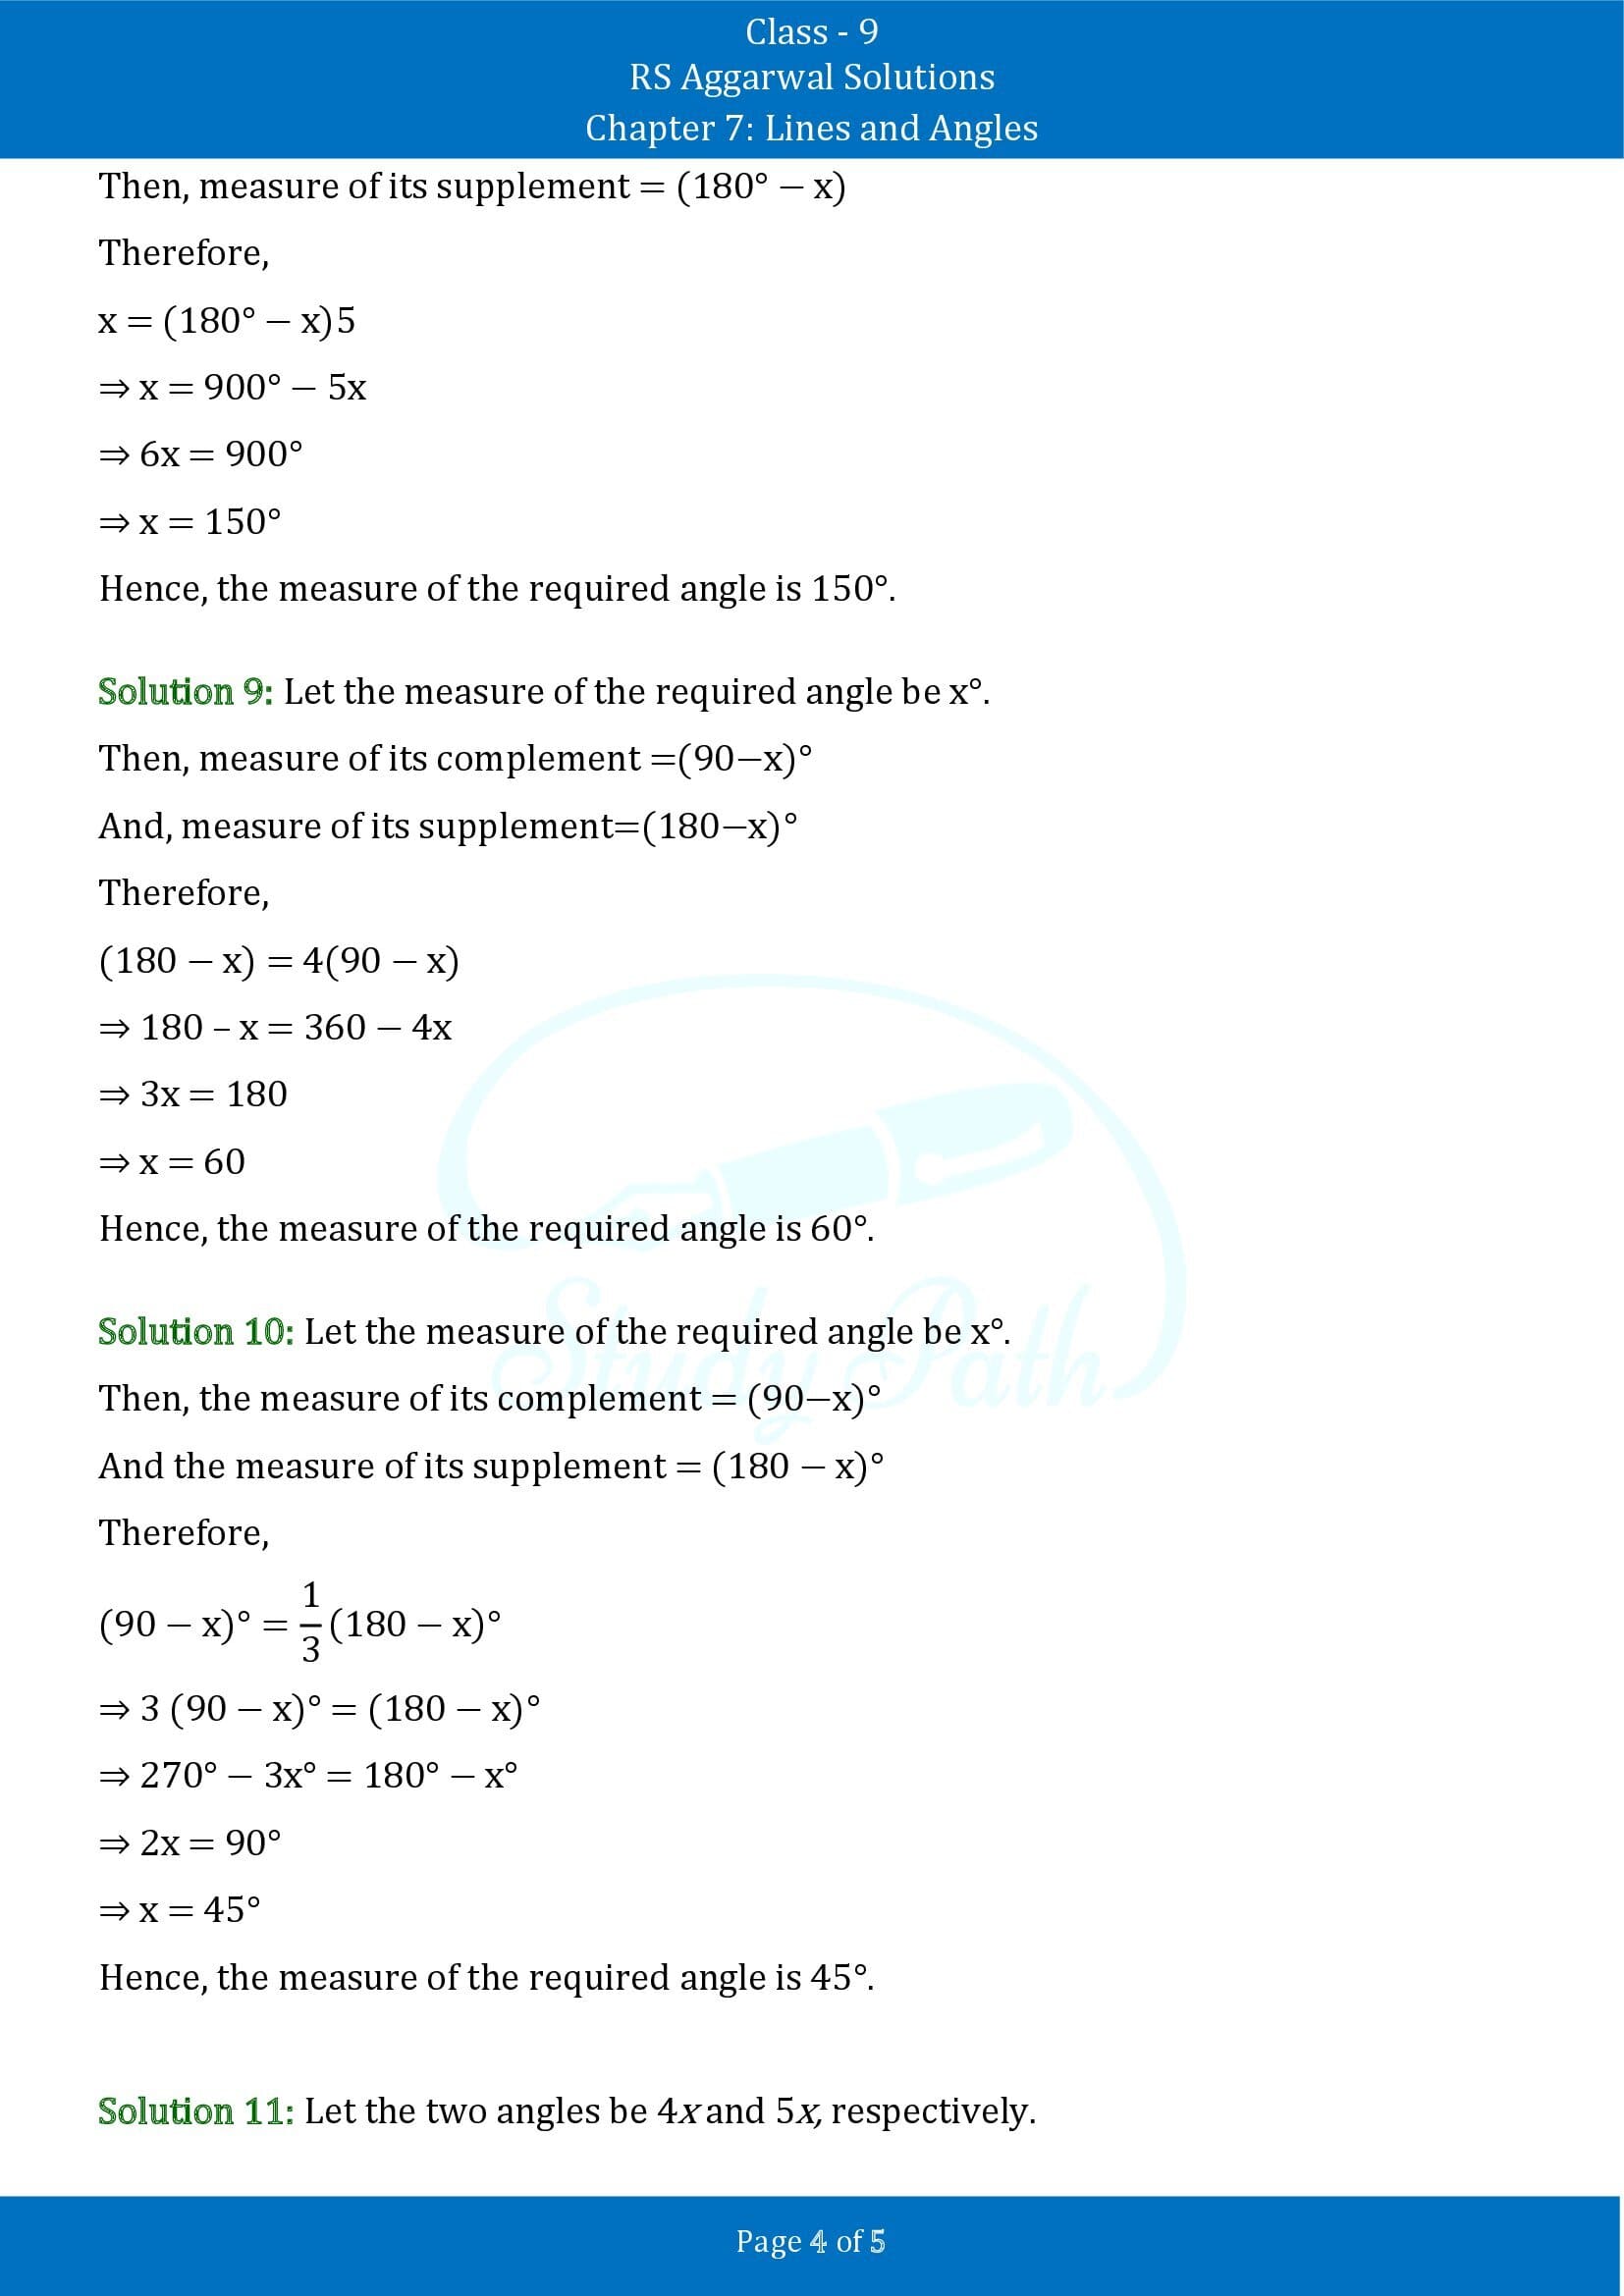 RS Aggarwal Solutions Class 9 Chapter 7 Lines and Angles Exercise 7A 00004